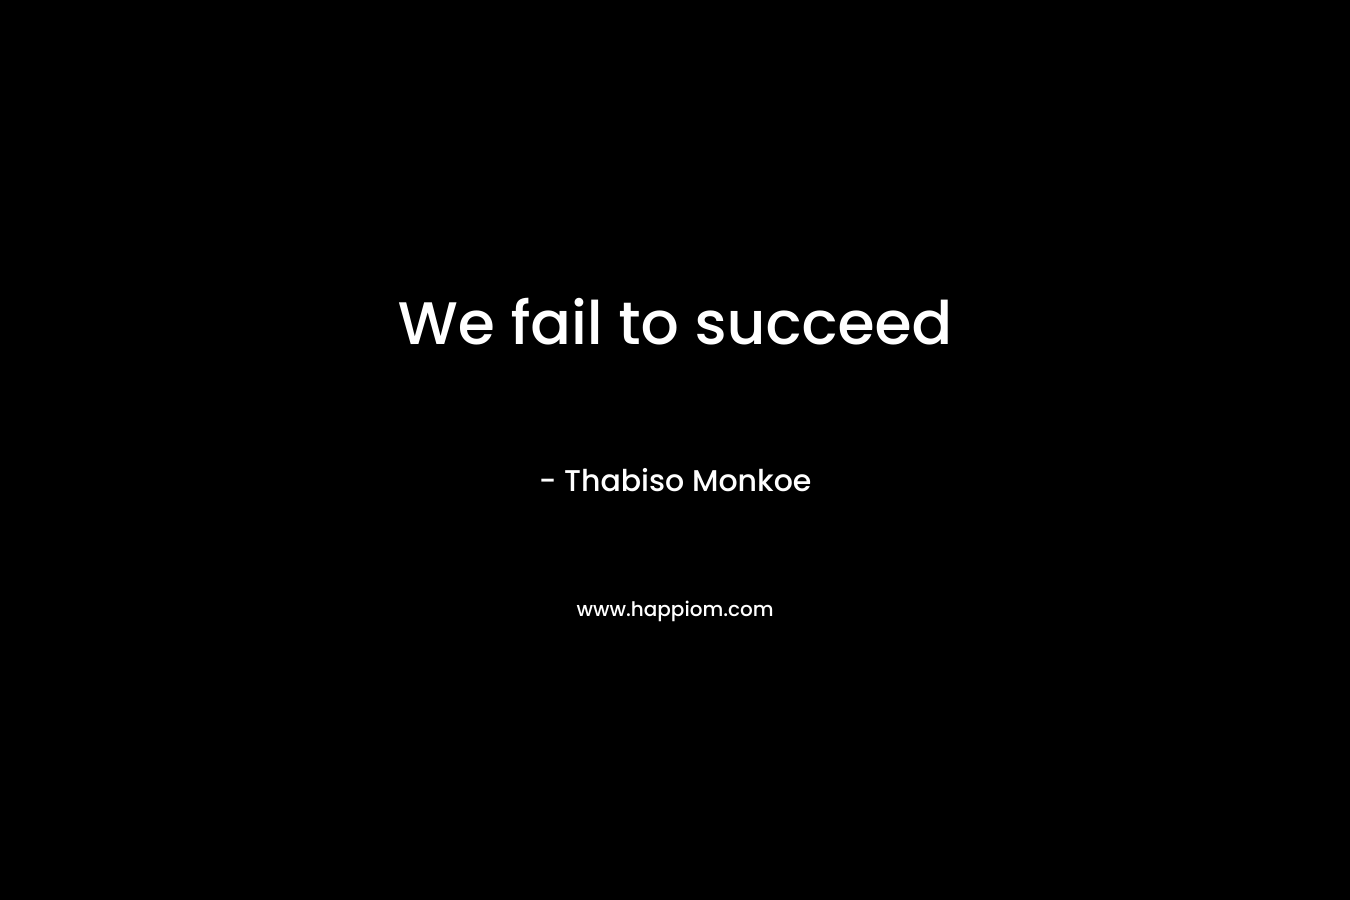 We fail to succeed